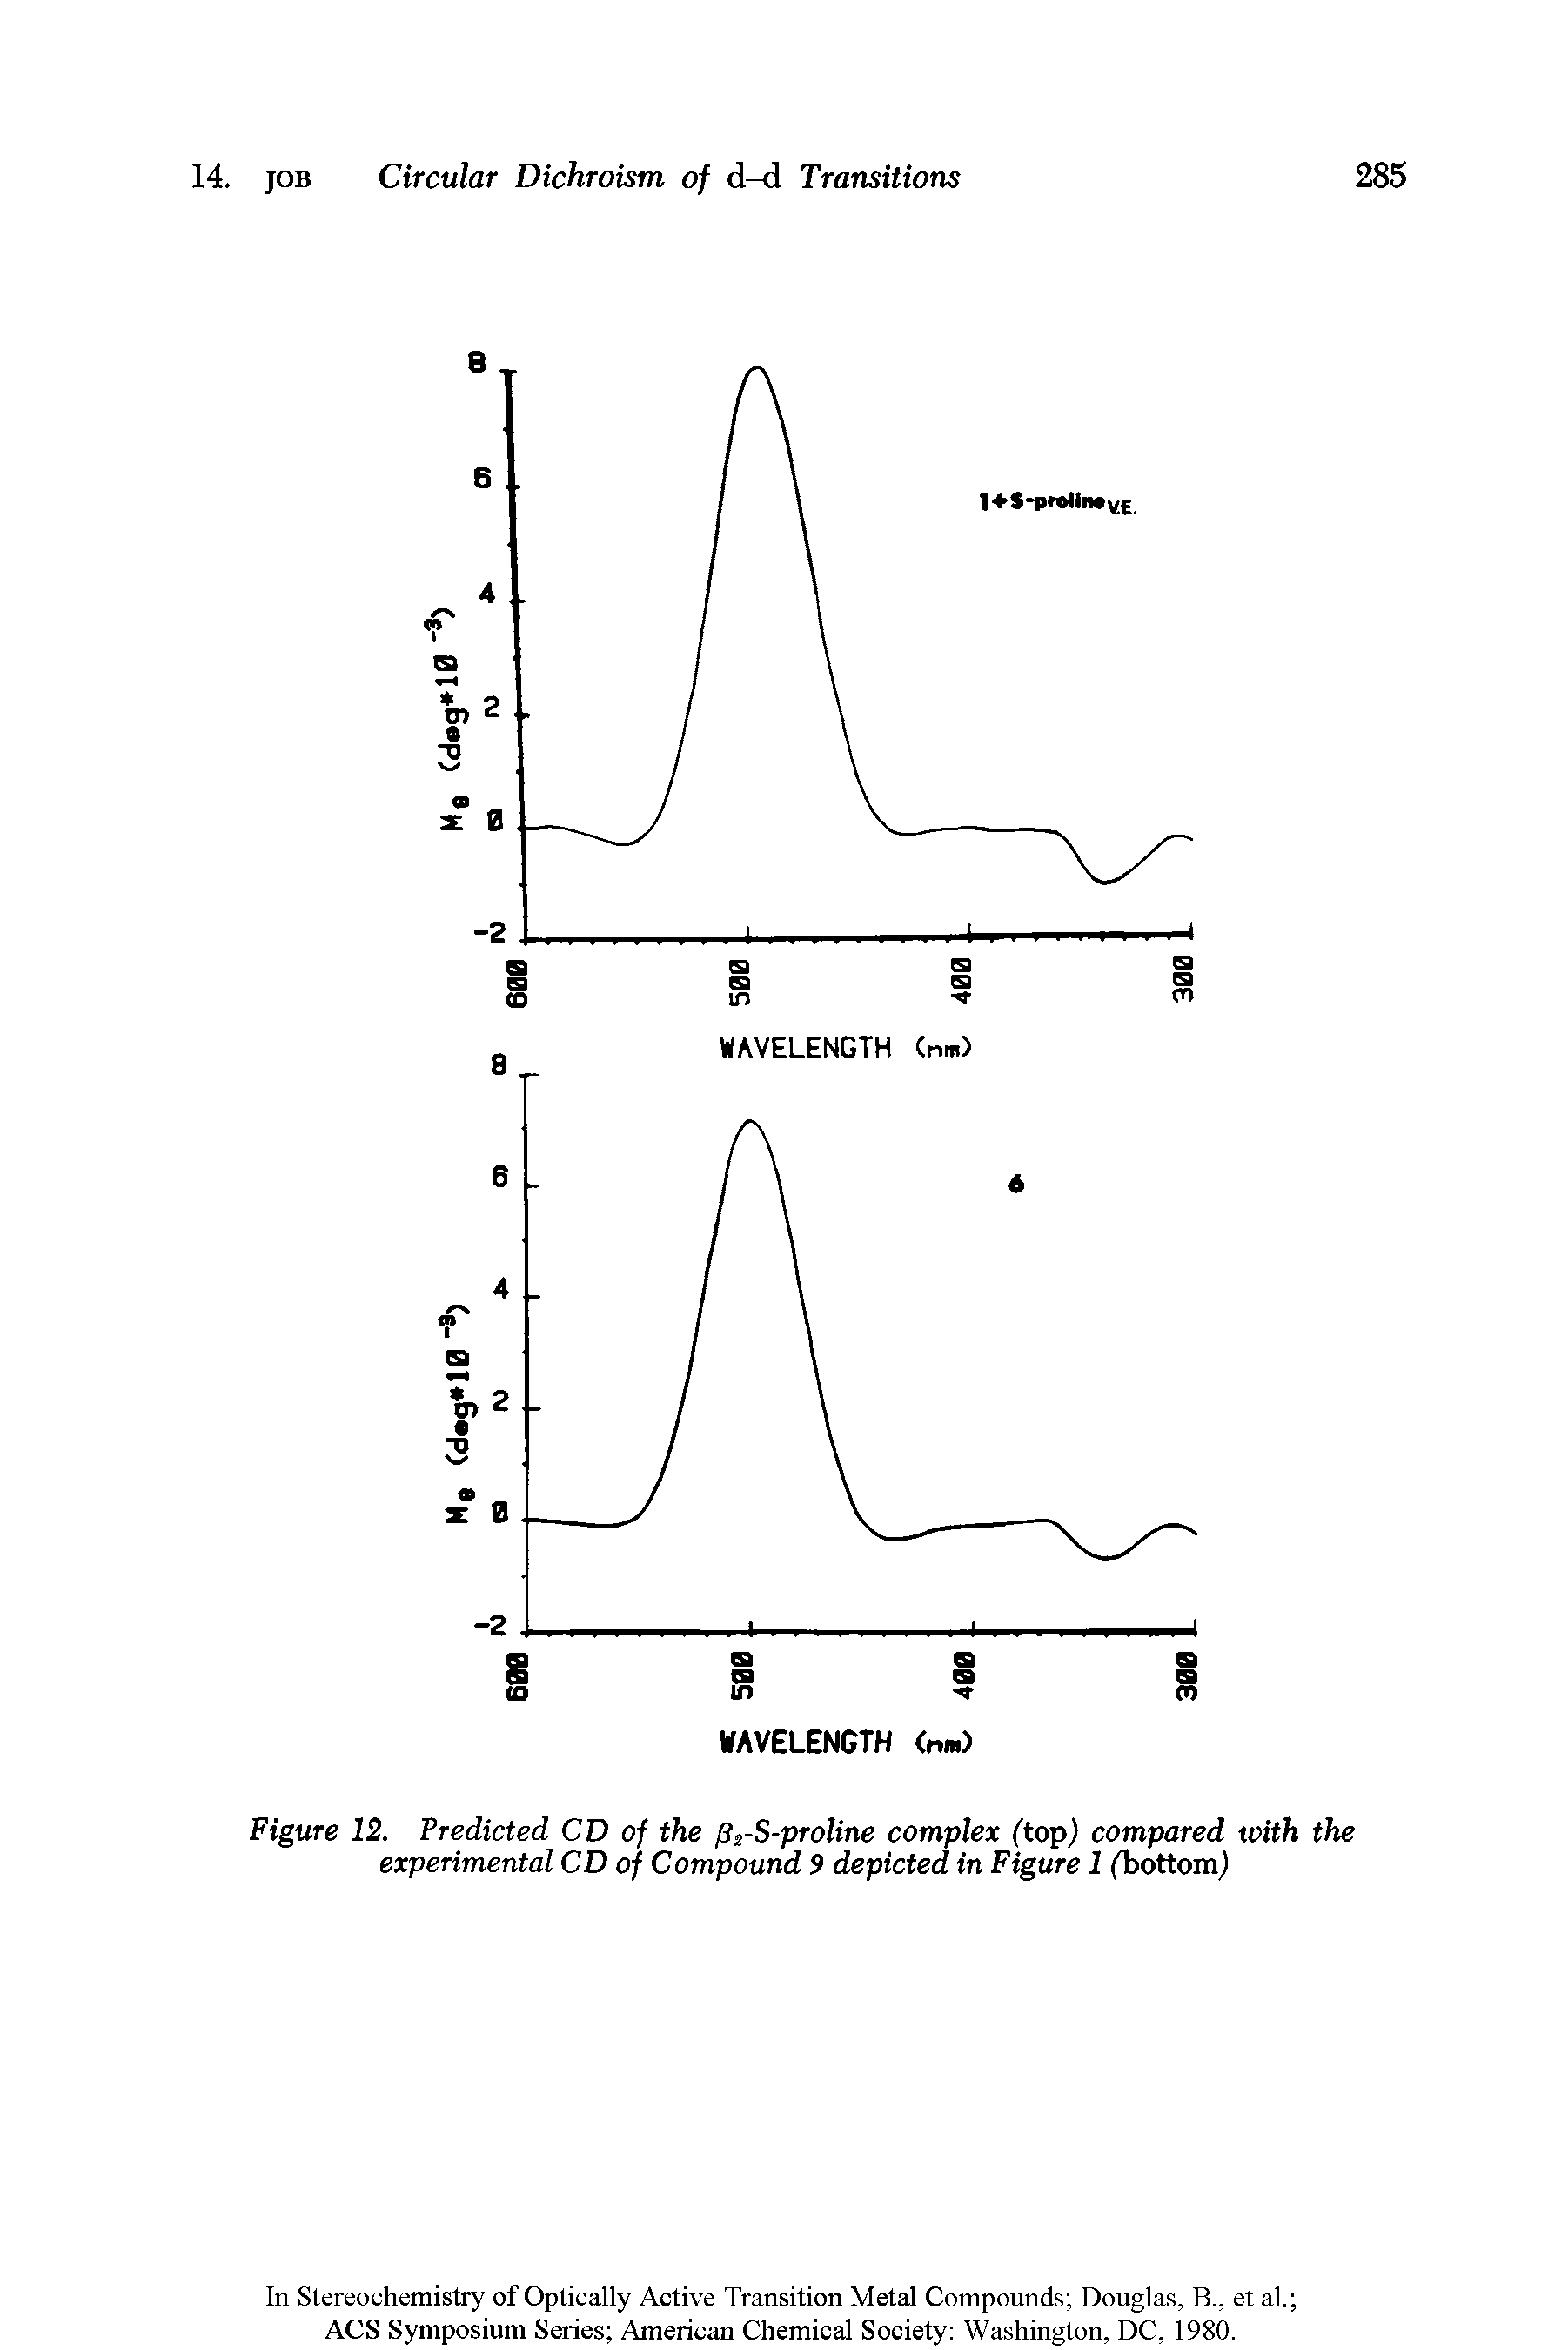 Figure 12. Predicted CD of the p2-S-proline complex (lop) compared with the experimental CD of Compound 9 depicted in Figure 1 (bottom)...